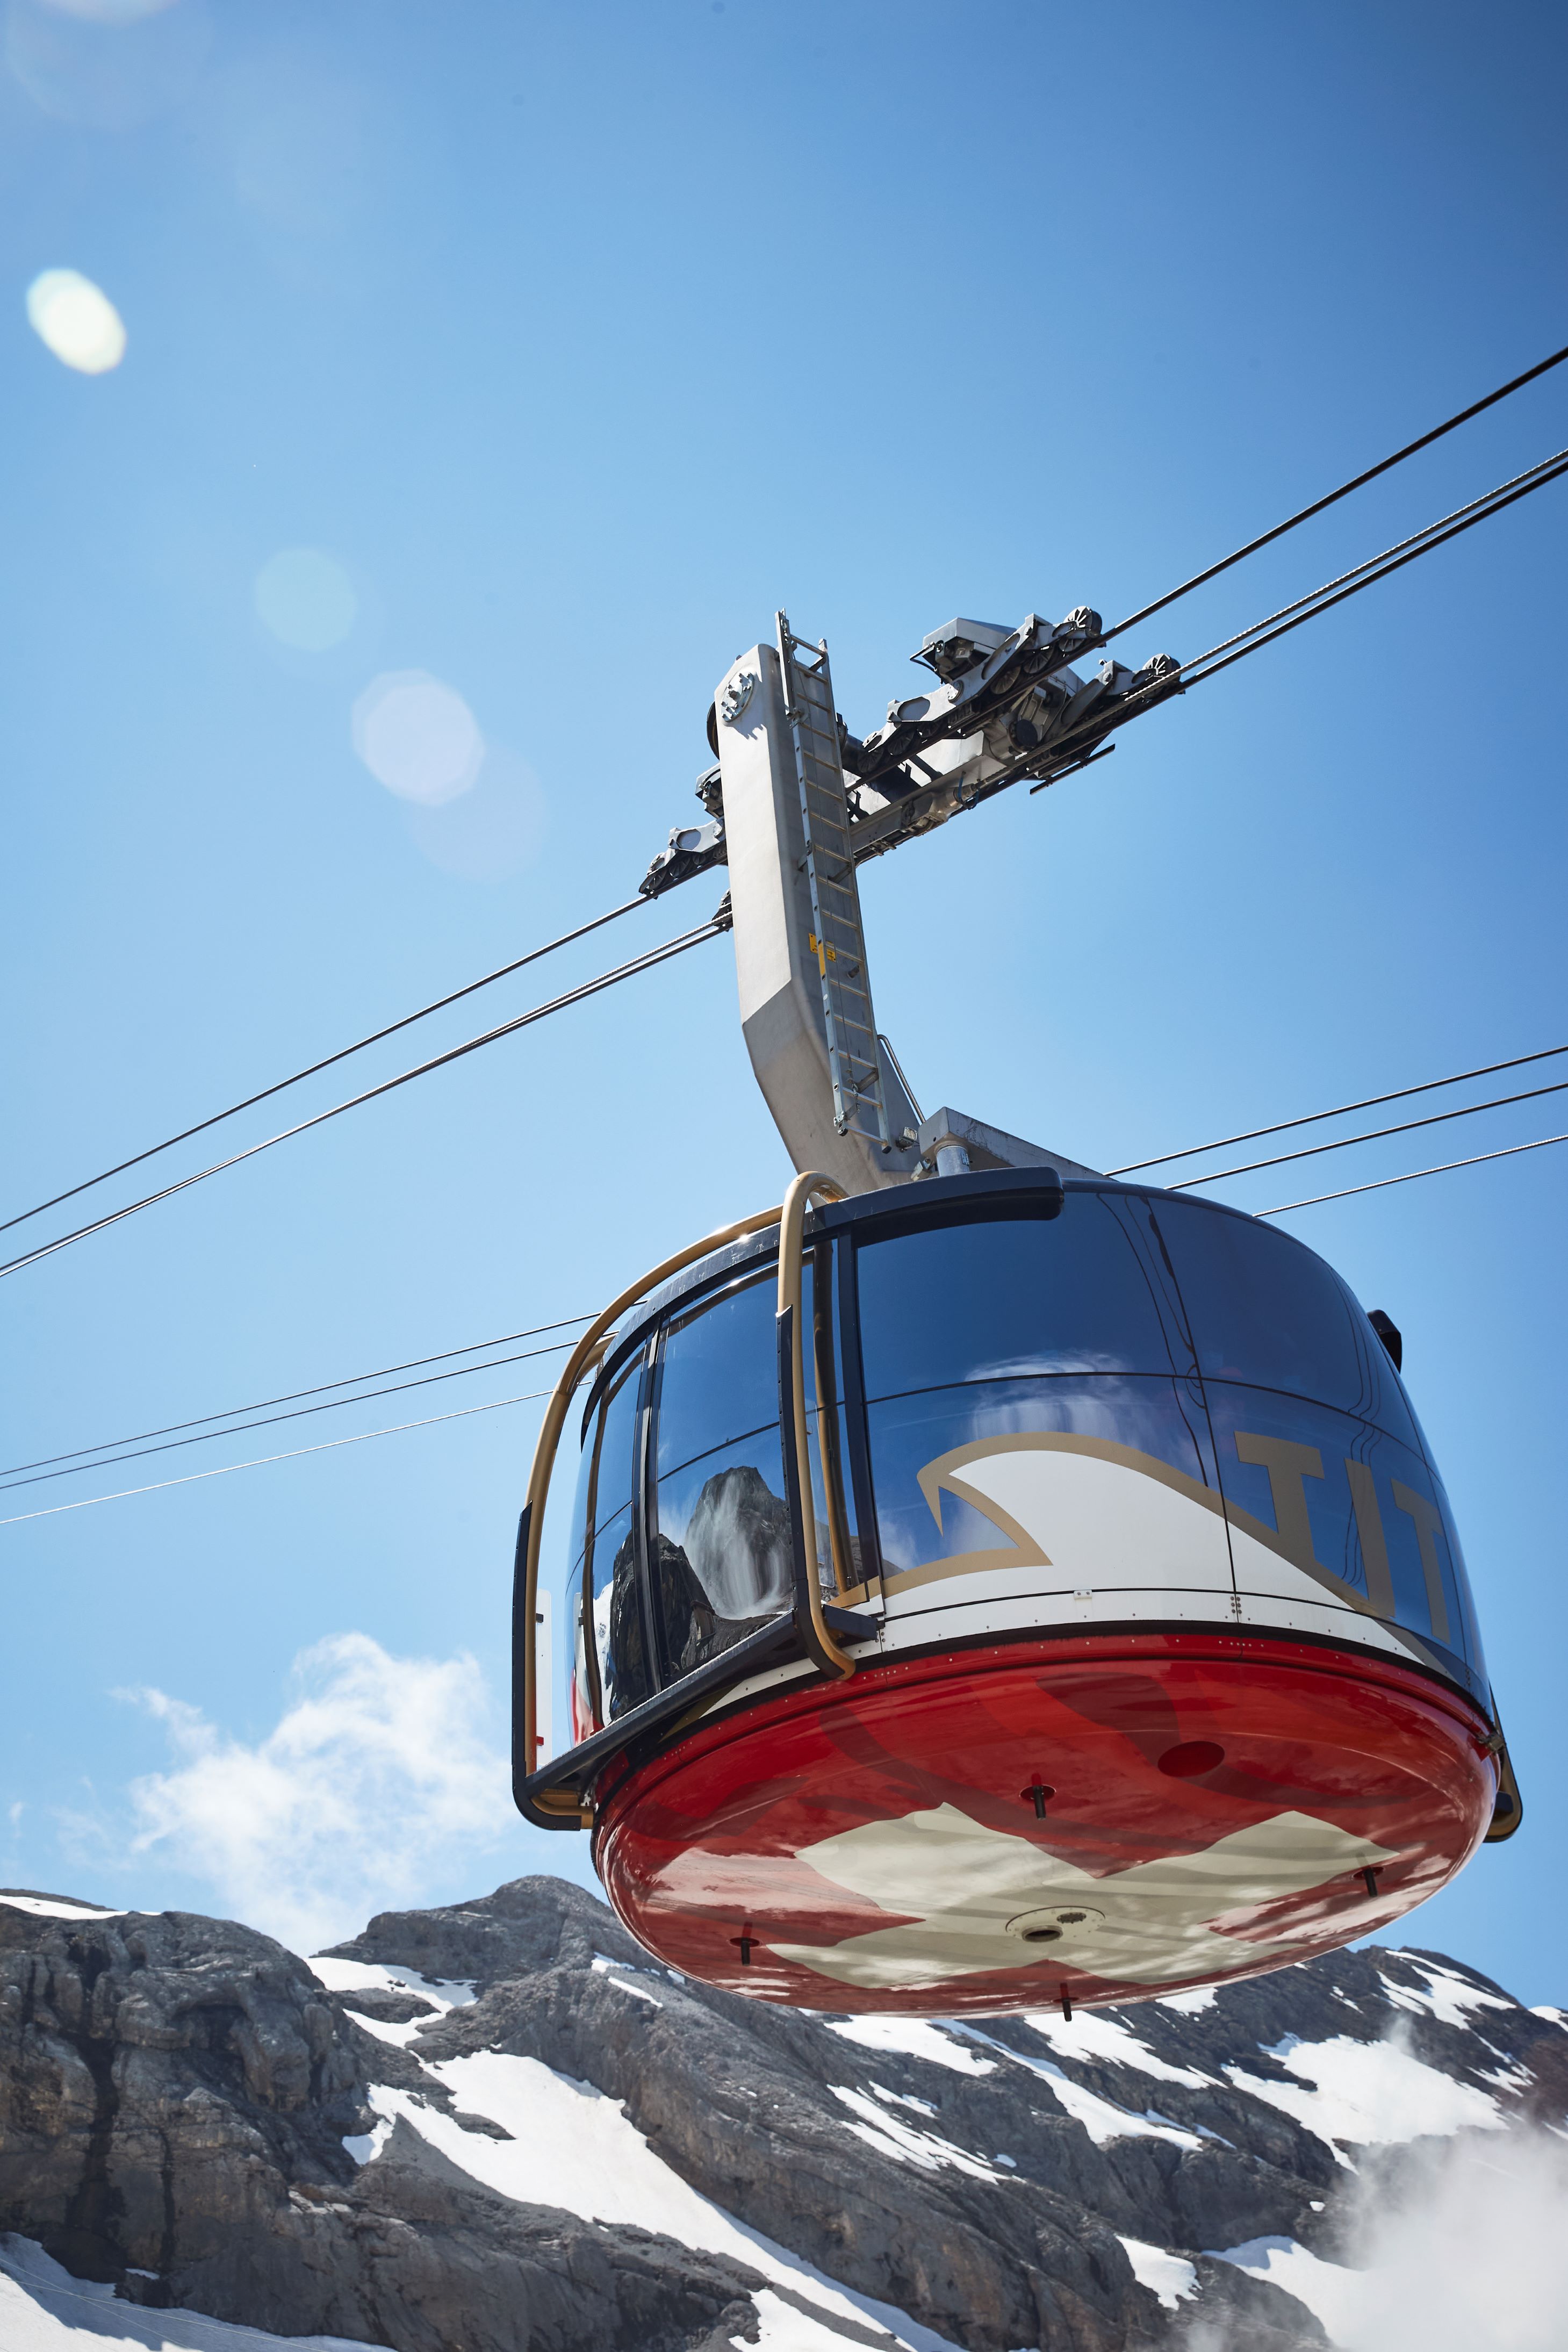 The ‘Rotair’, the world’s first revolving cable car